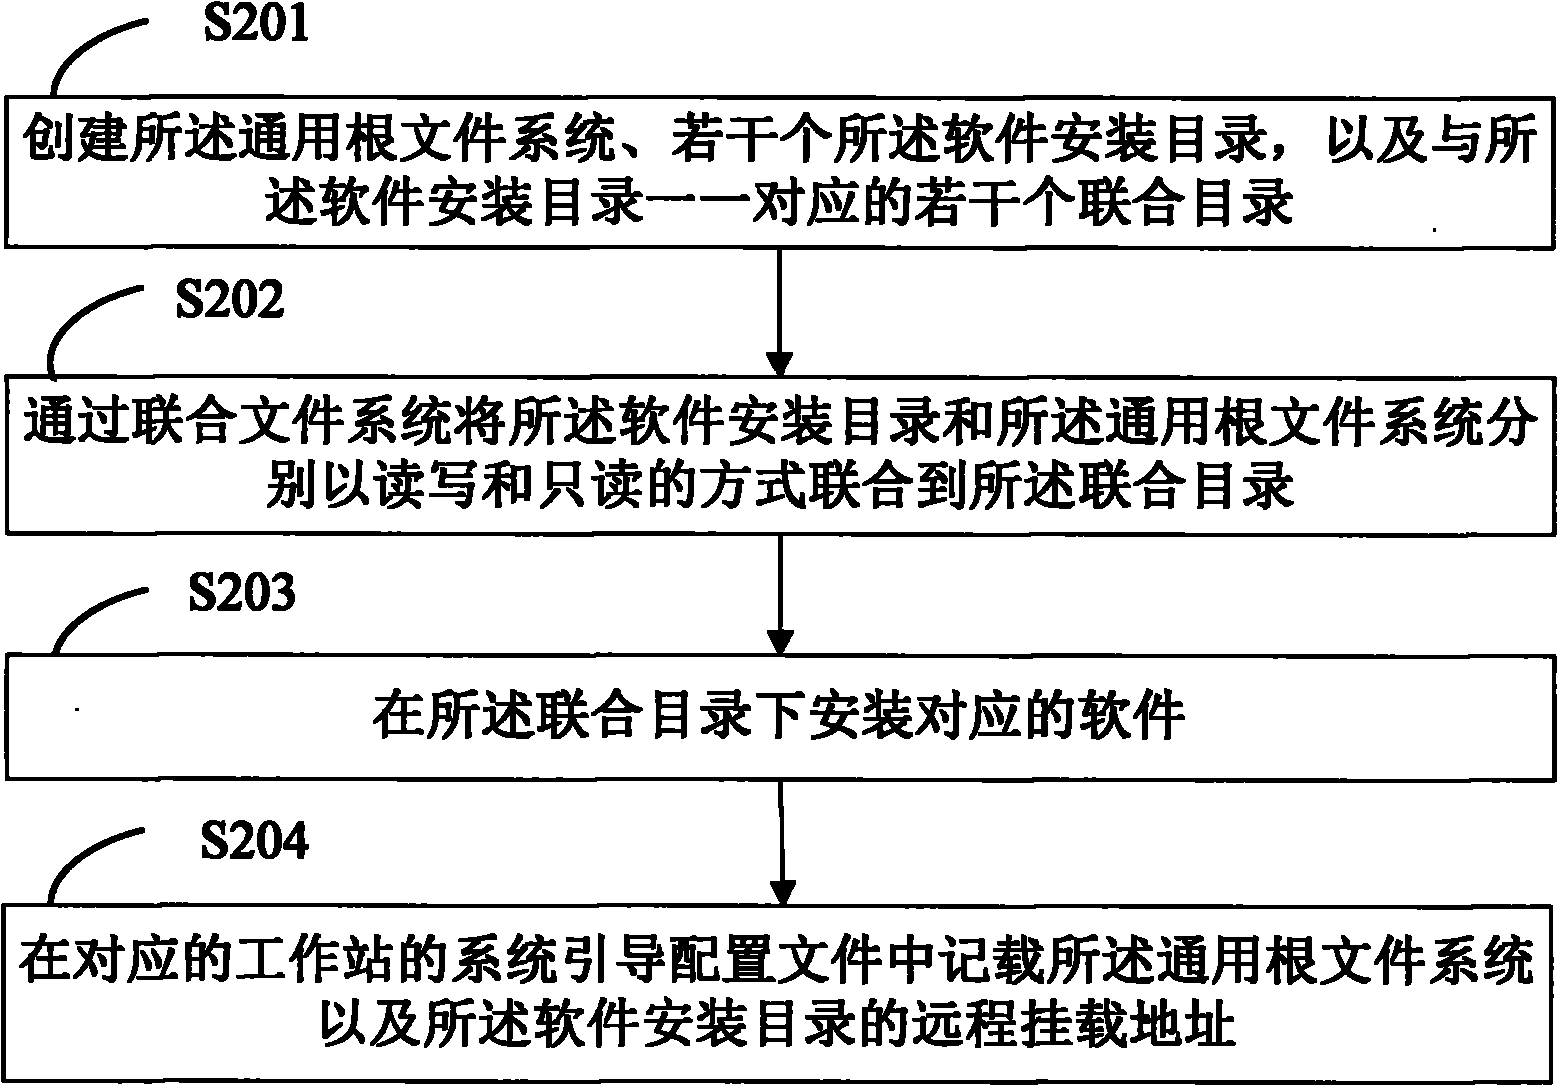 Diskless system, workstation thereof, and building method of local root file by workstation